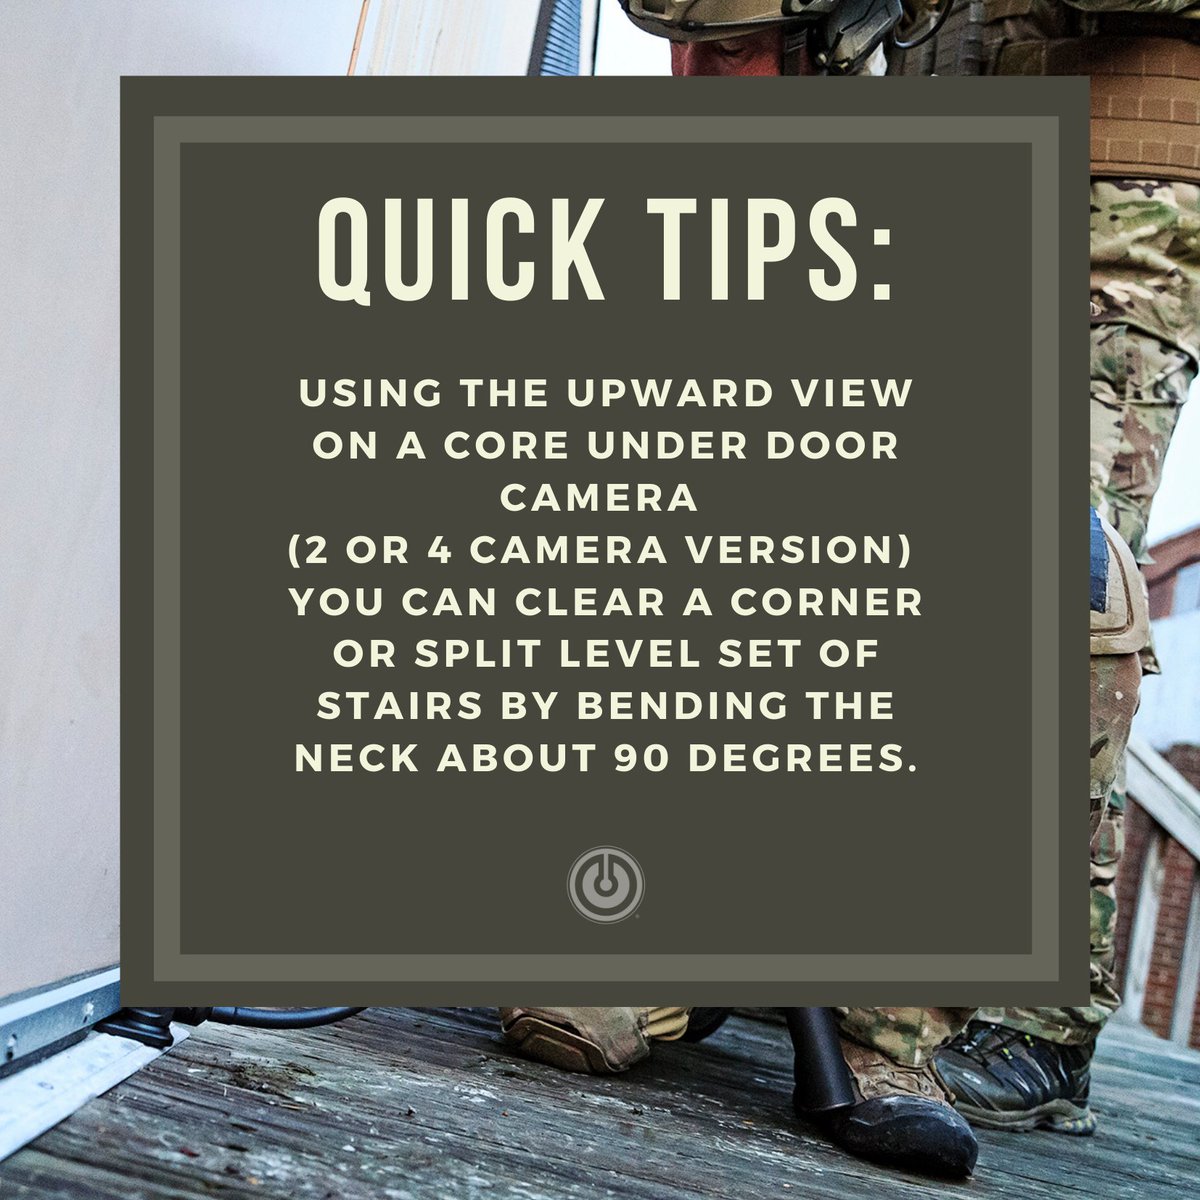 QUICK TIPS: Using the upward view on a CORE Under door camera 
(2 or 4 camera version) 
you can clear a corner or split level set of stairs by bending the neck about 90 degrees.

tacticalelectronics.com/product/core-u…

#TacticalTips #QuickTips #CORECameras #COREUnderDoorCamera